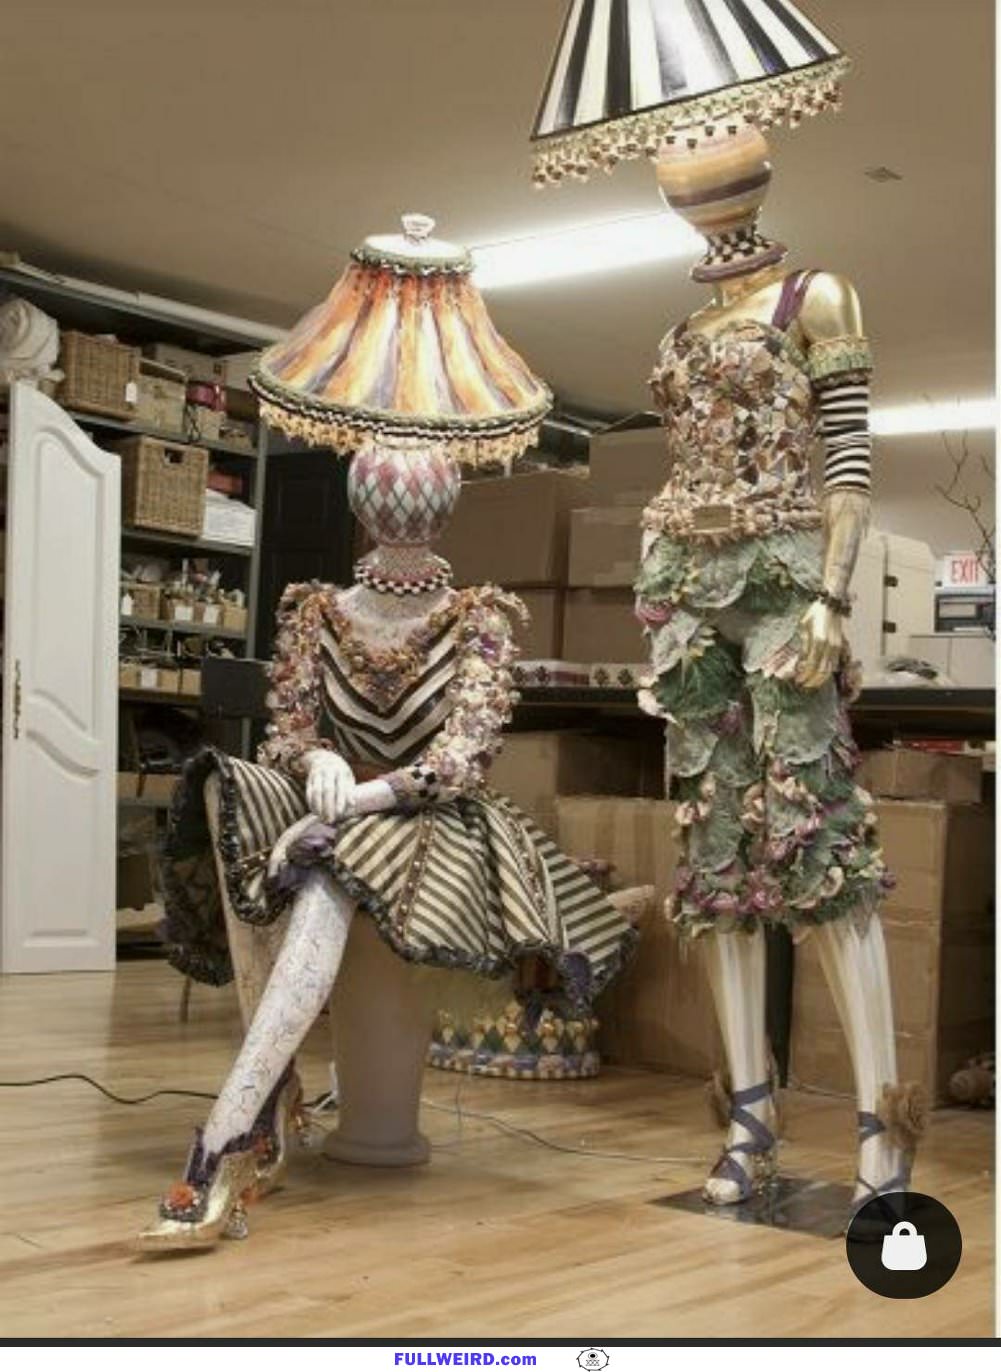 Check Out Our Lamps